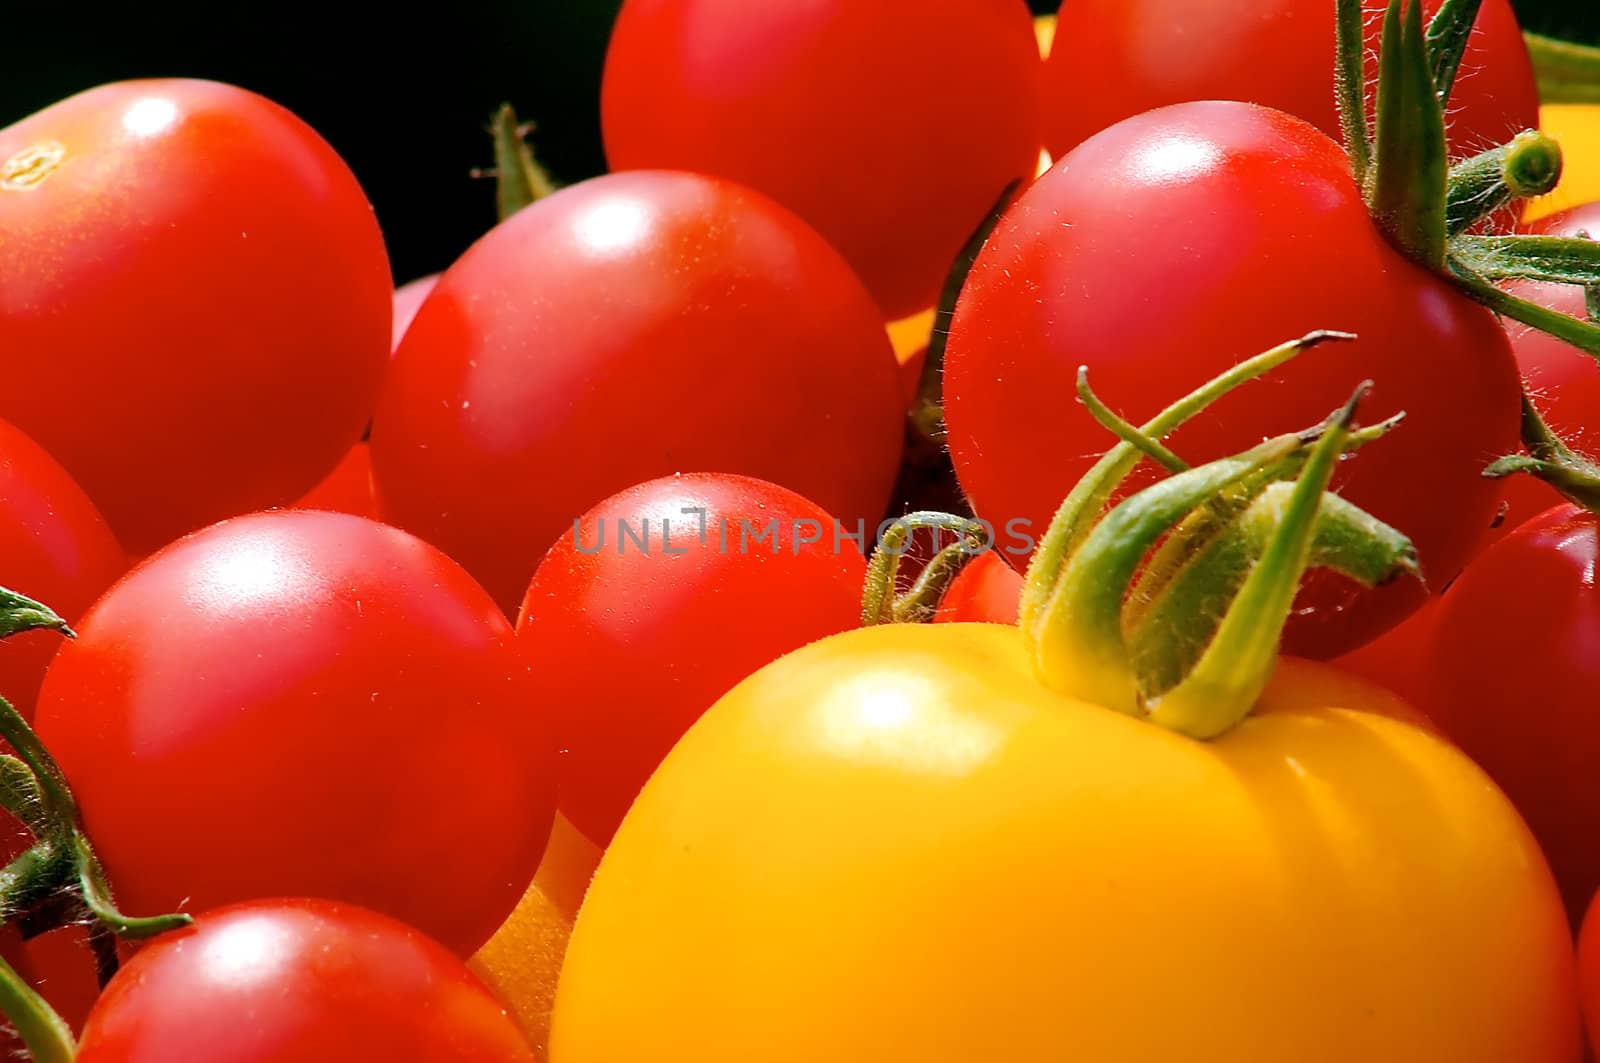 yellow, green and red tomatoes